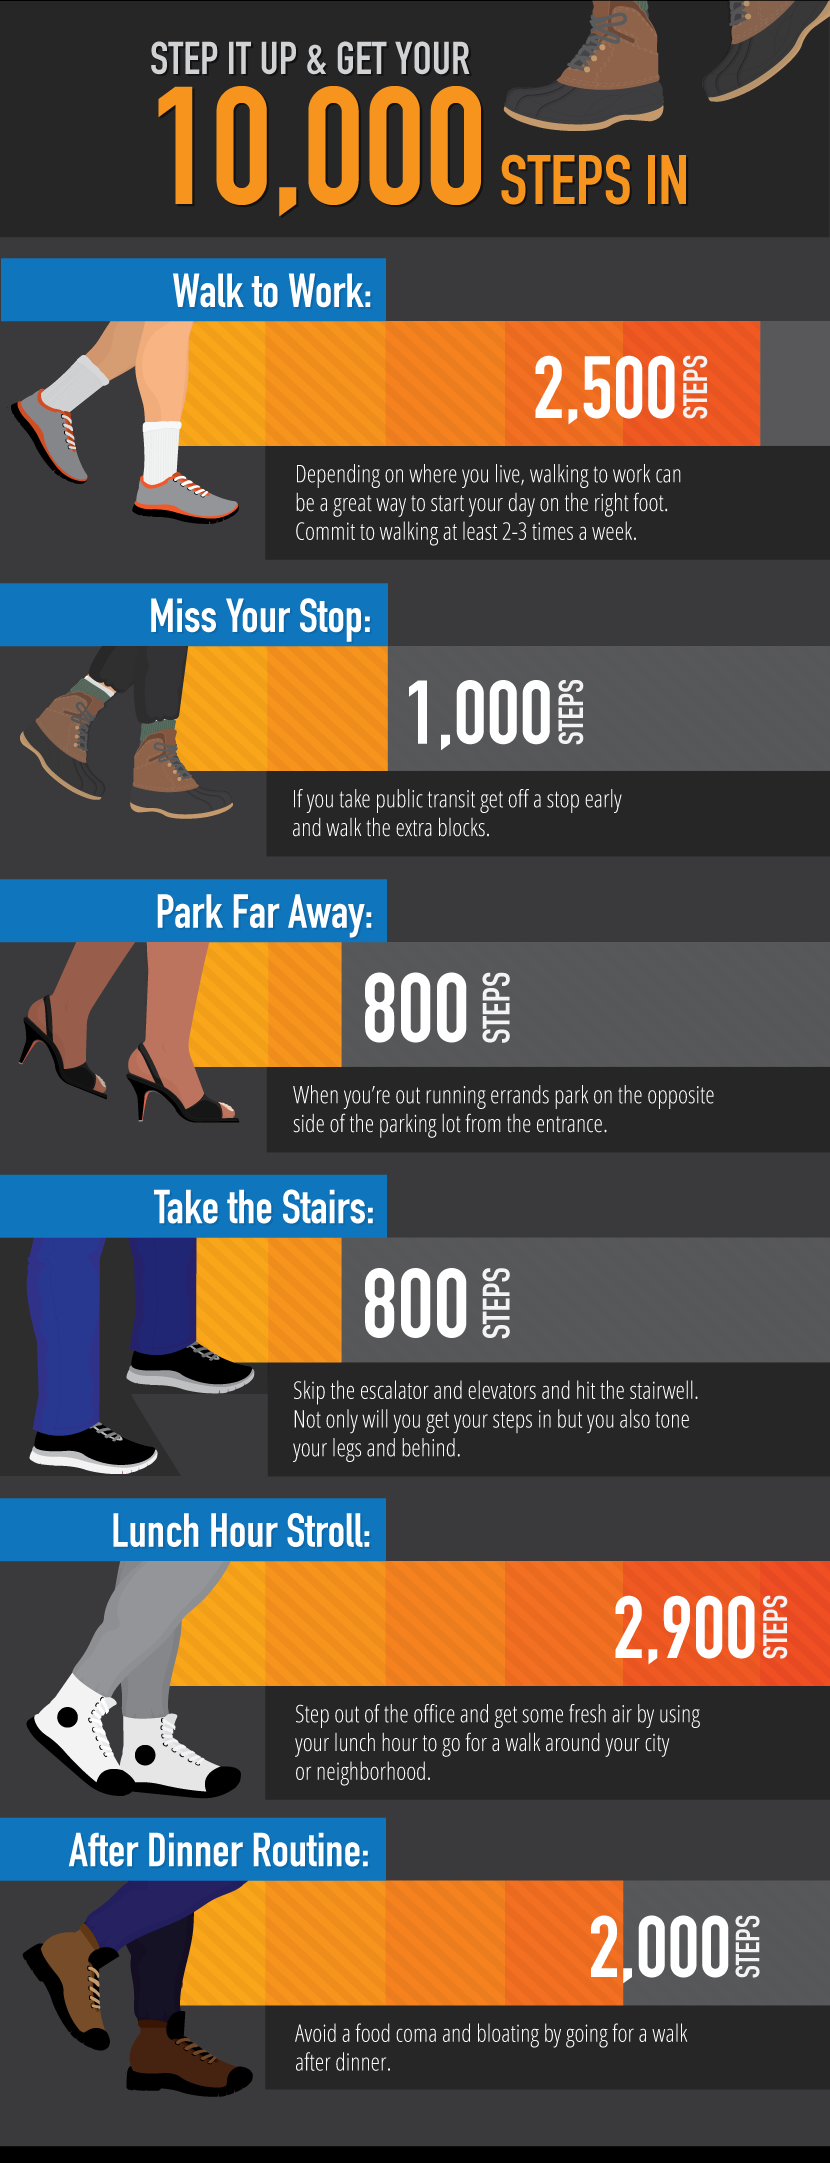 Get Your 10000 Steps In - Walk Your Way to Fitness